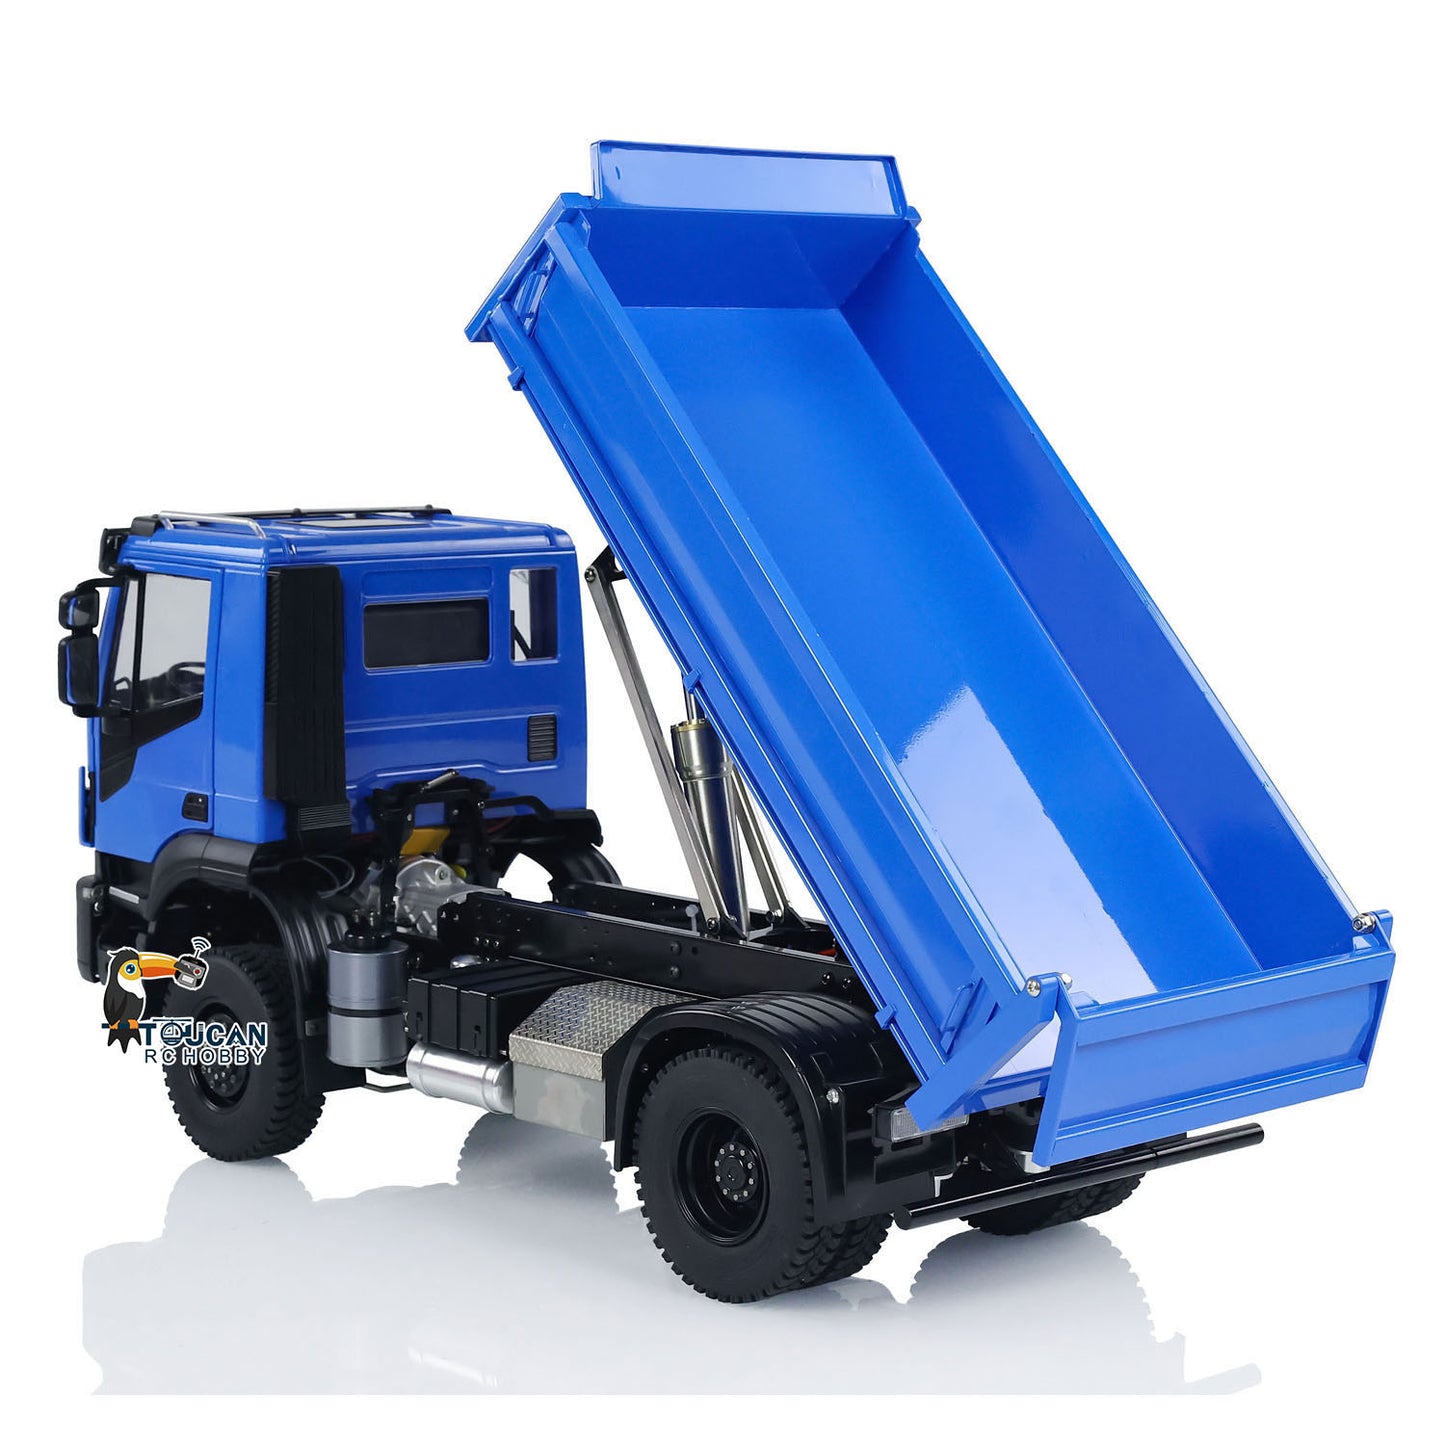 Metal 1/14 4x4 RC Hydraulic Dump Truck Customized Radio Control Tipper Car Simulation Model FlySky I6S Assembled and Painted